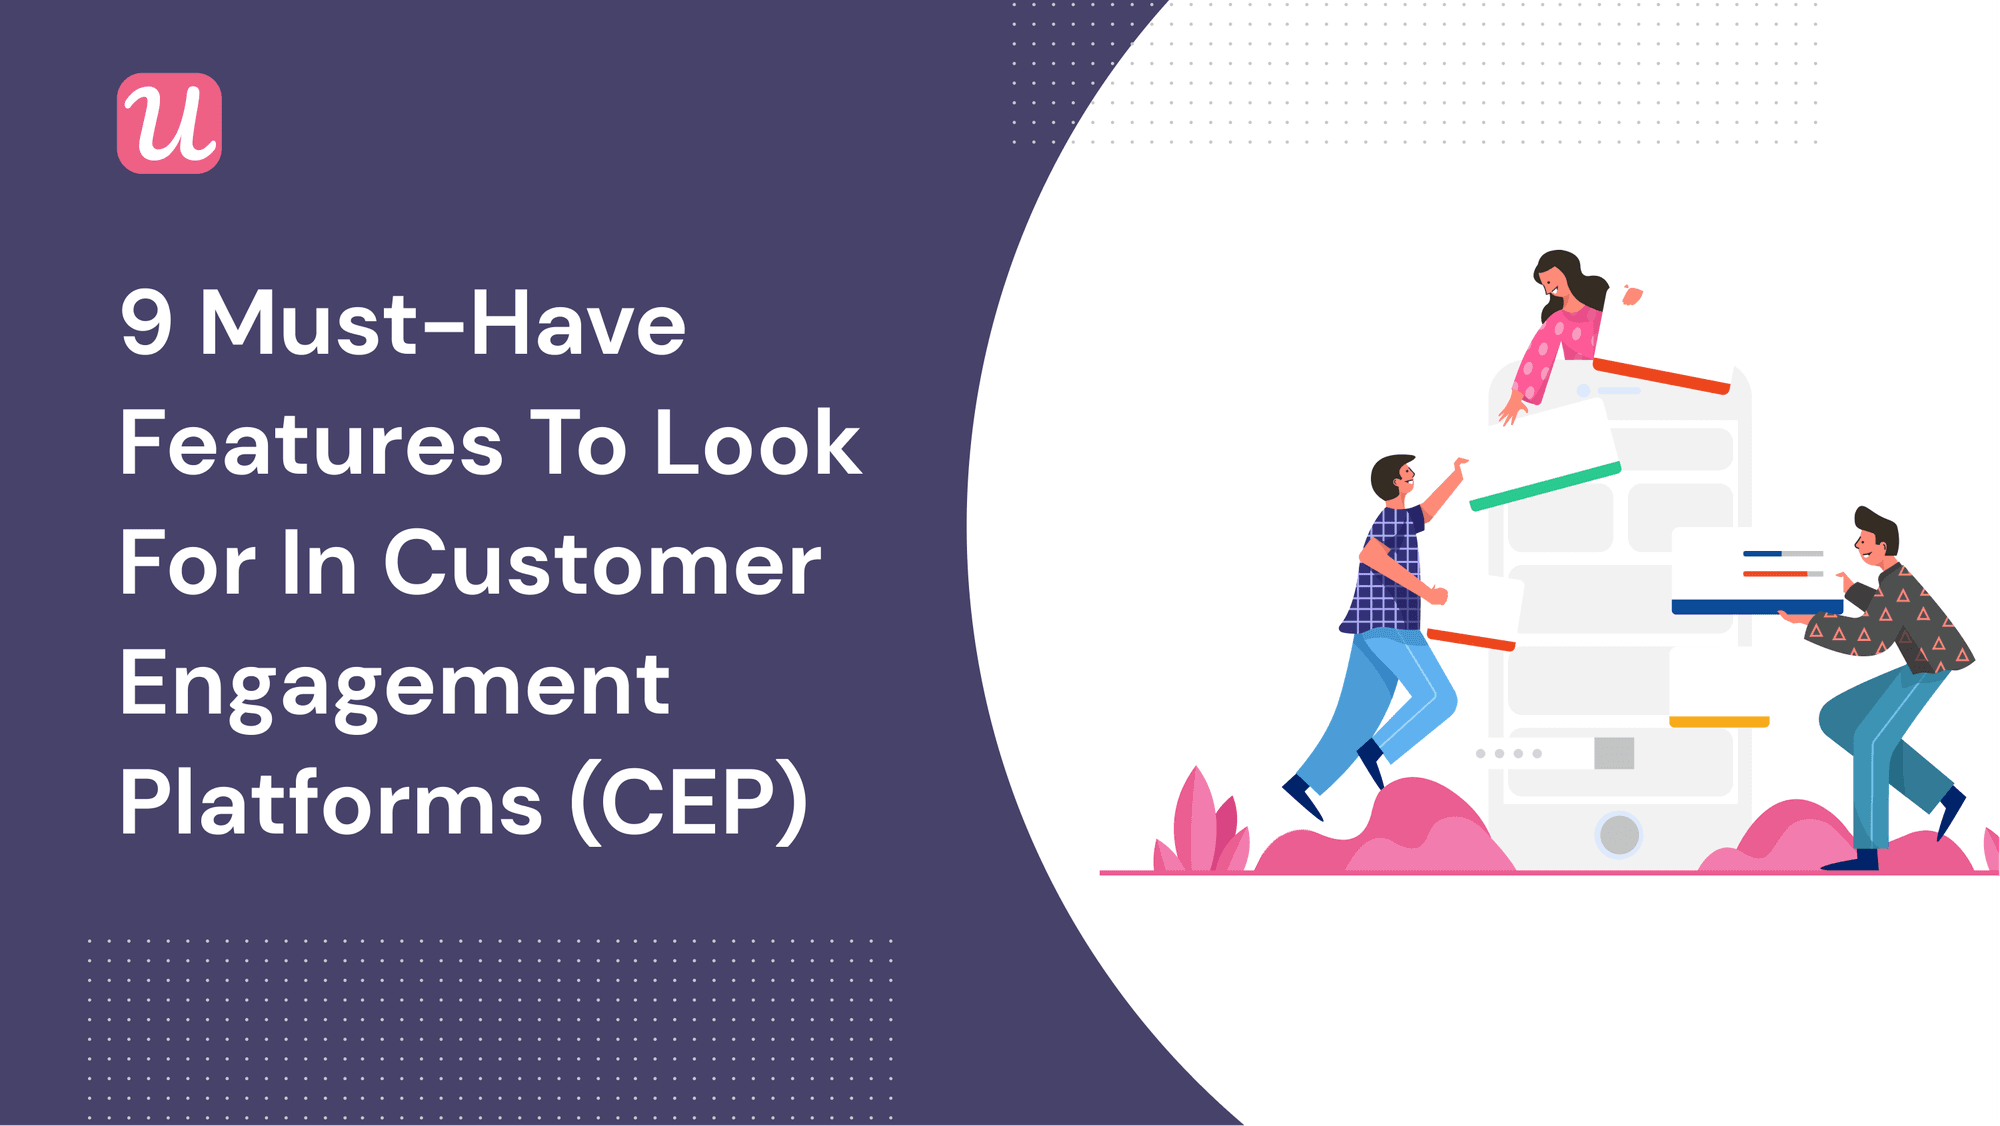 9 Must-Have Features To Look For In Customer Engagement Platforms (CEPs)